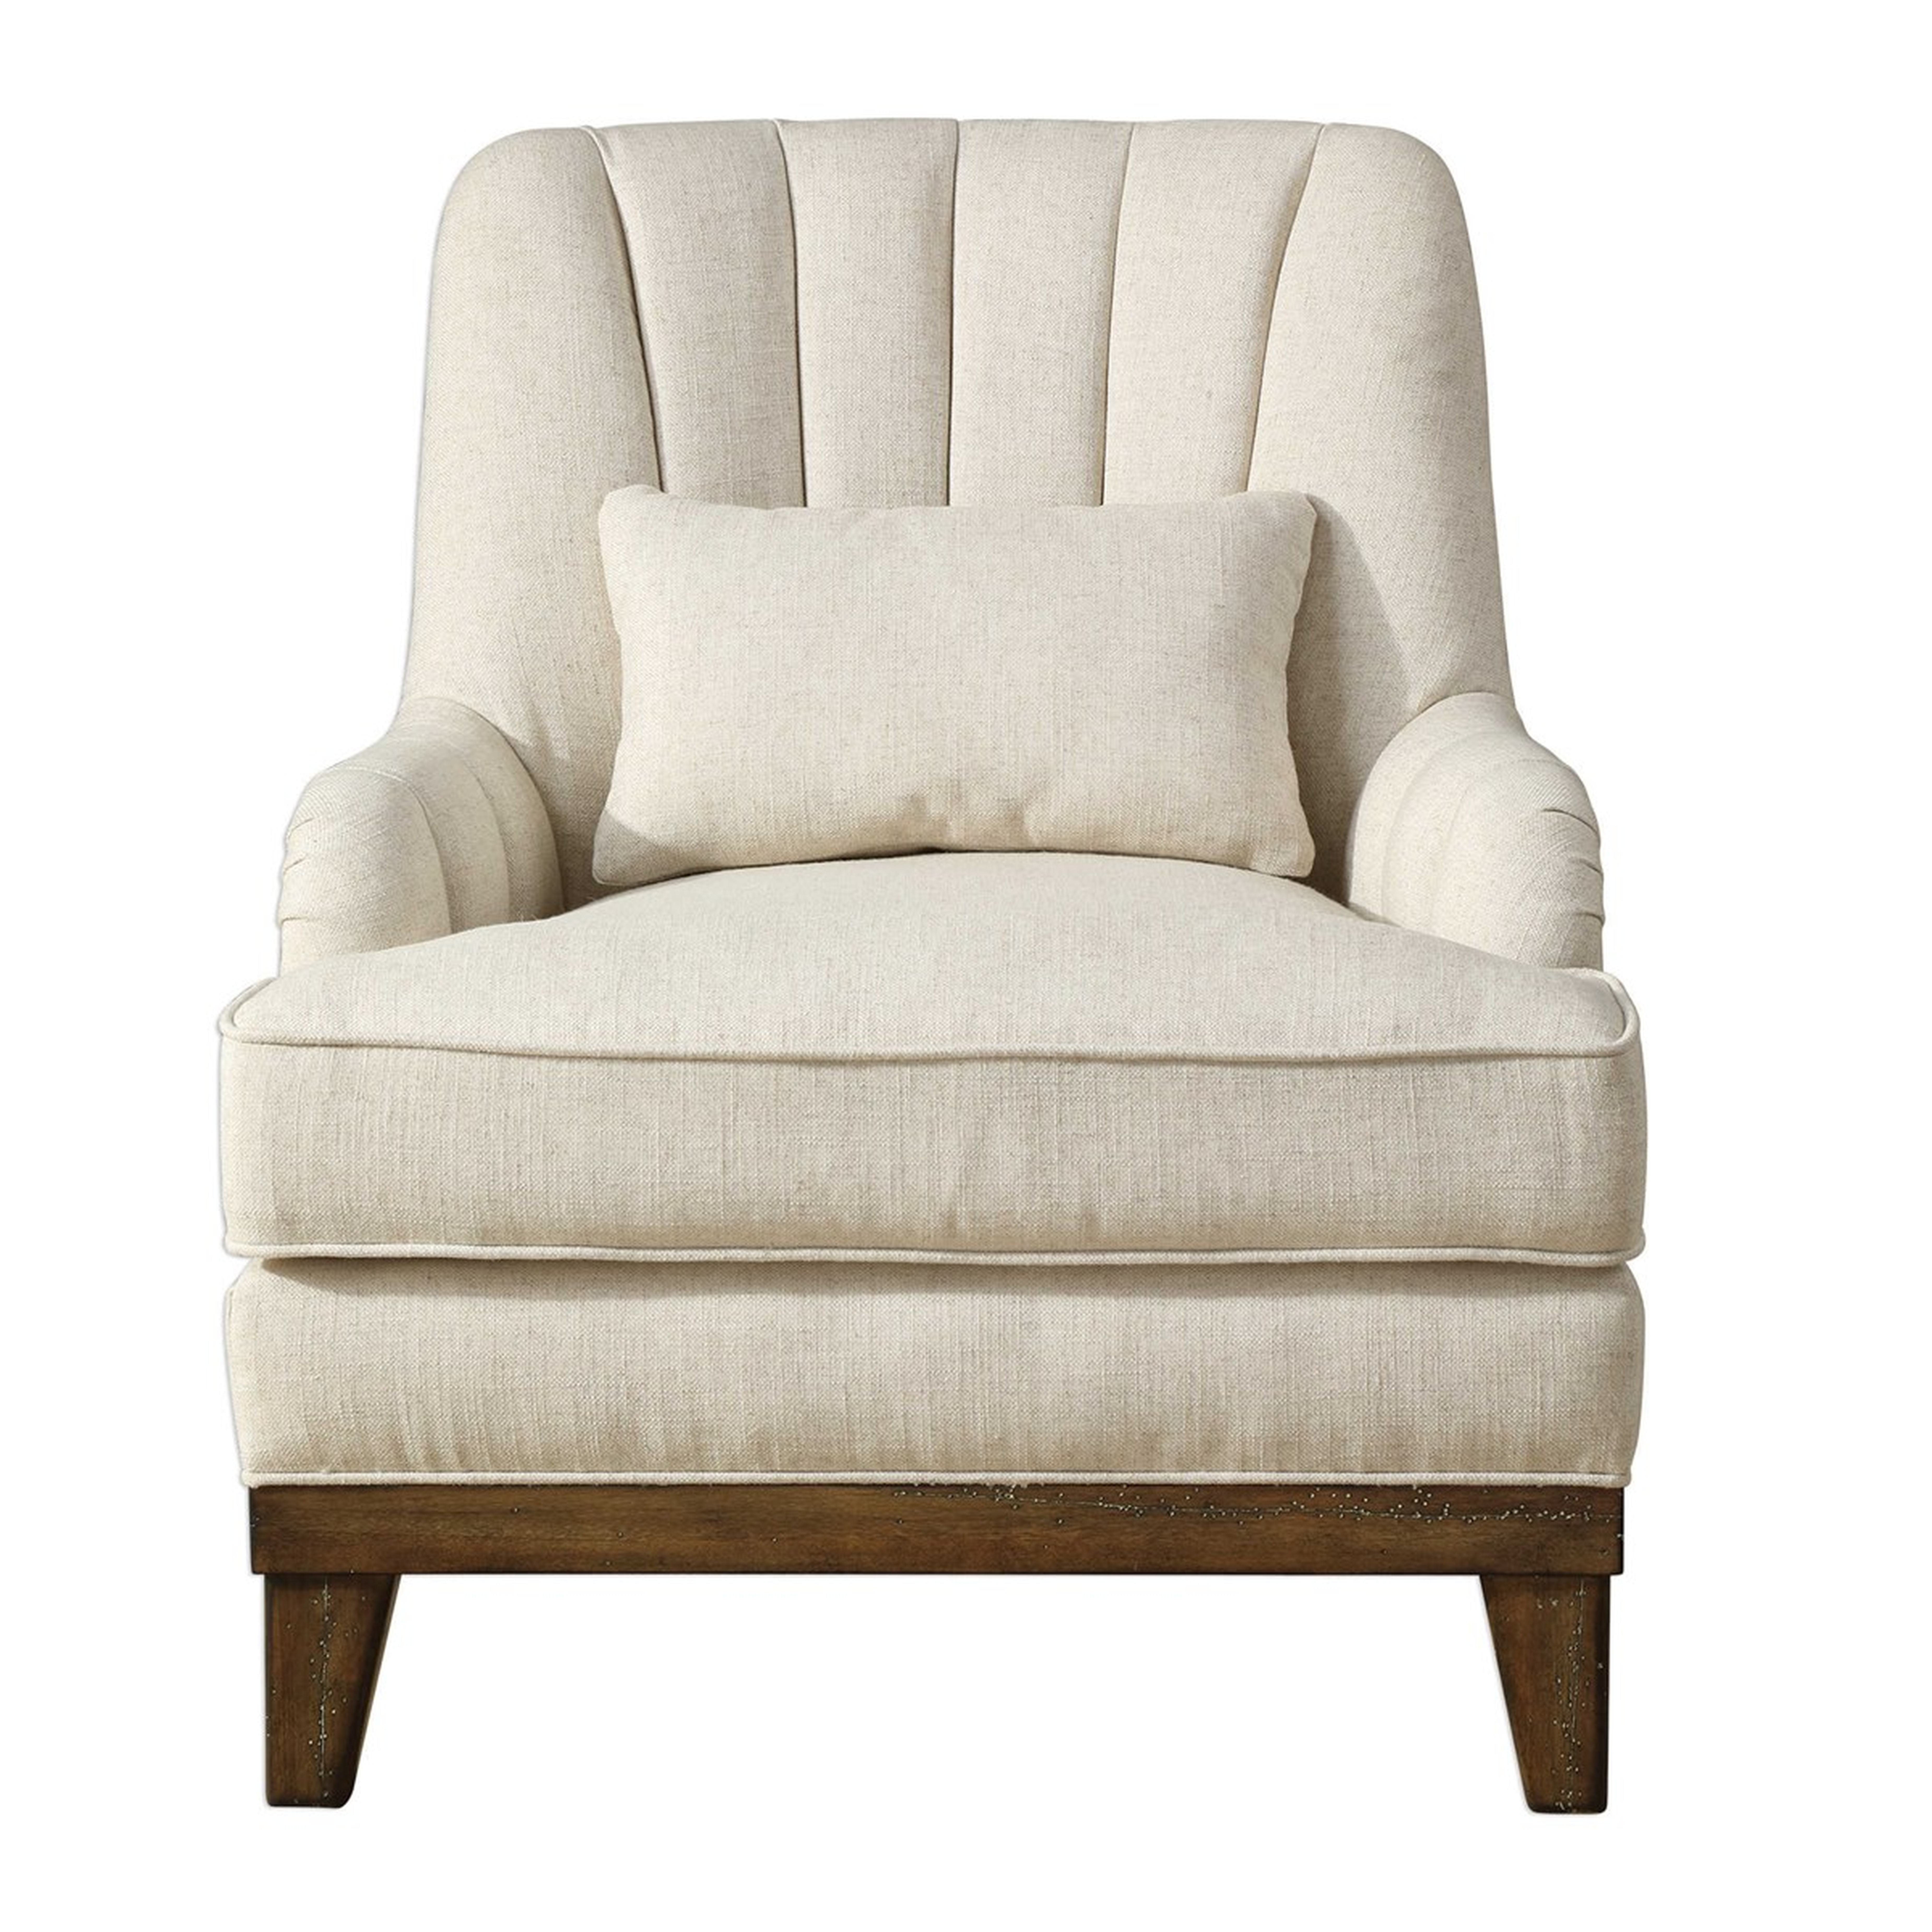 DENNEY ACCENT CHAIR - Hudsonhill Foundry